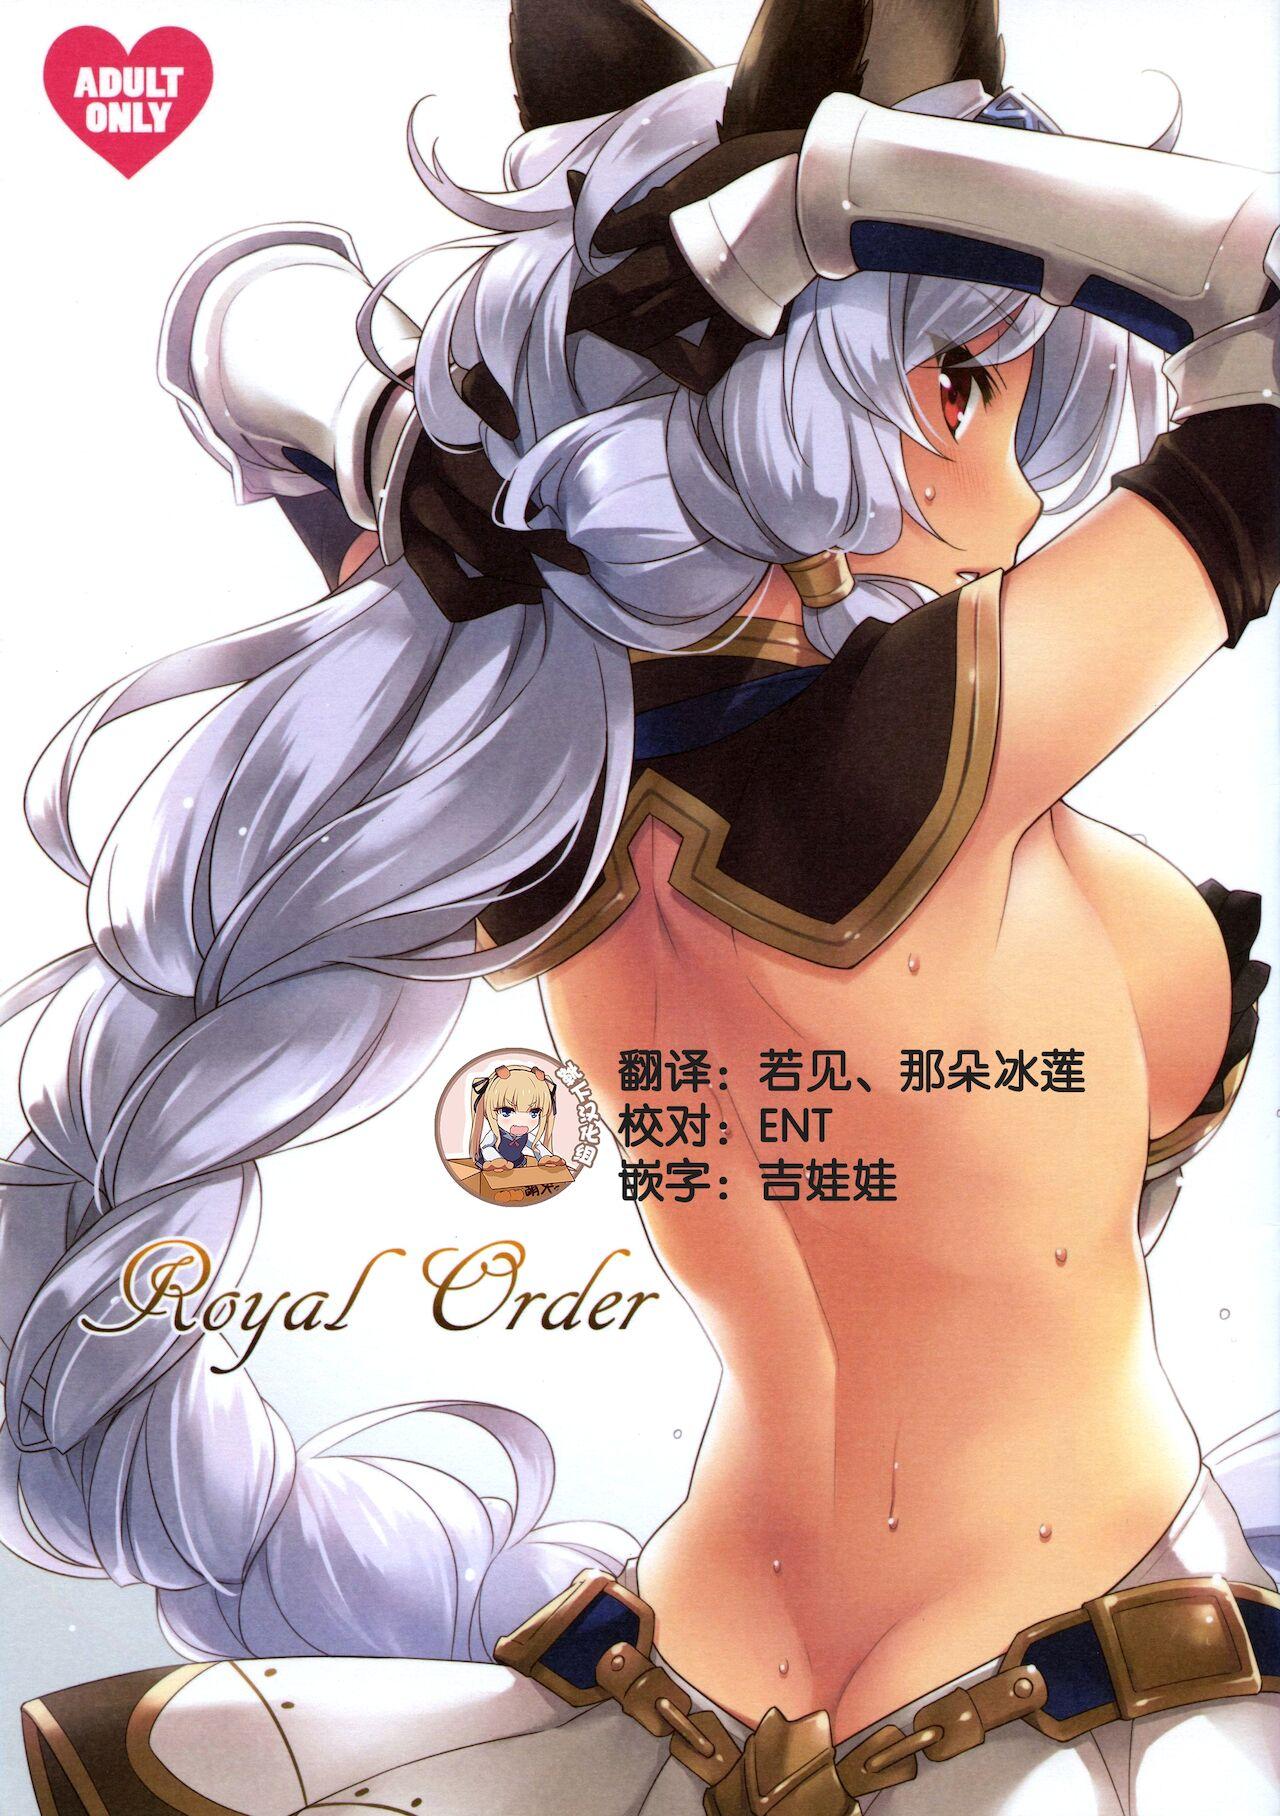 Amature Sex Royal Order - Granblue fantasy Girlfriends - Page 2